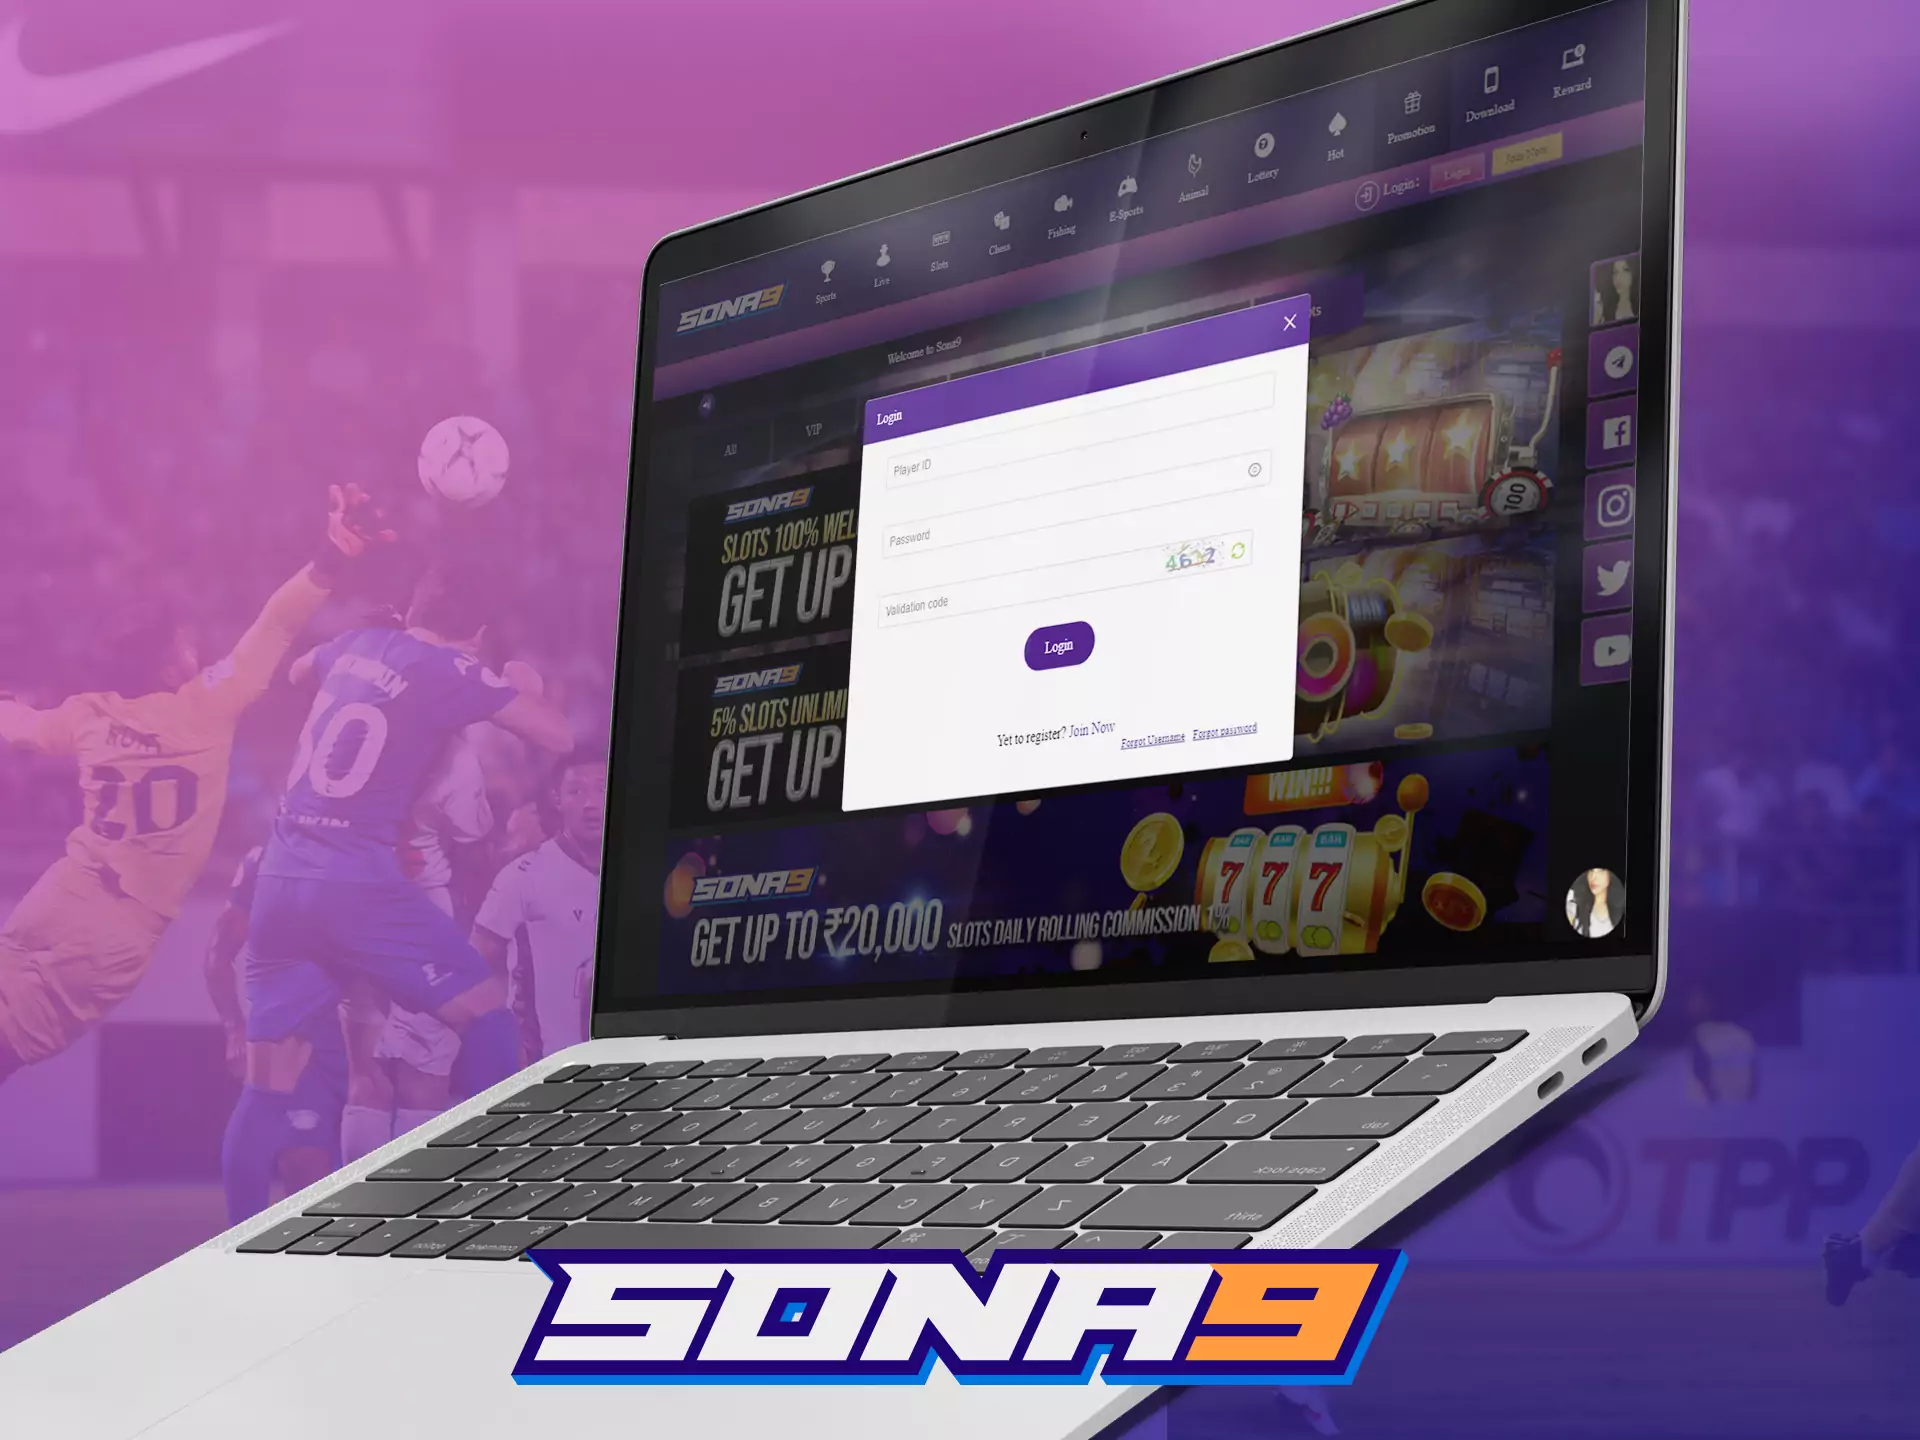 After you created an account, log in to the site to start betting on Sona9.